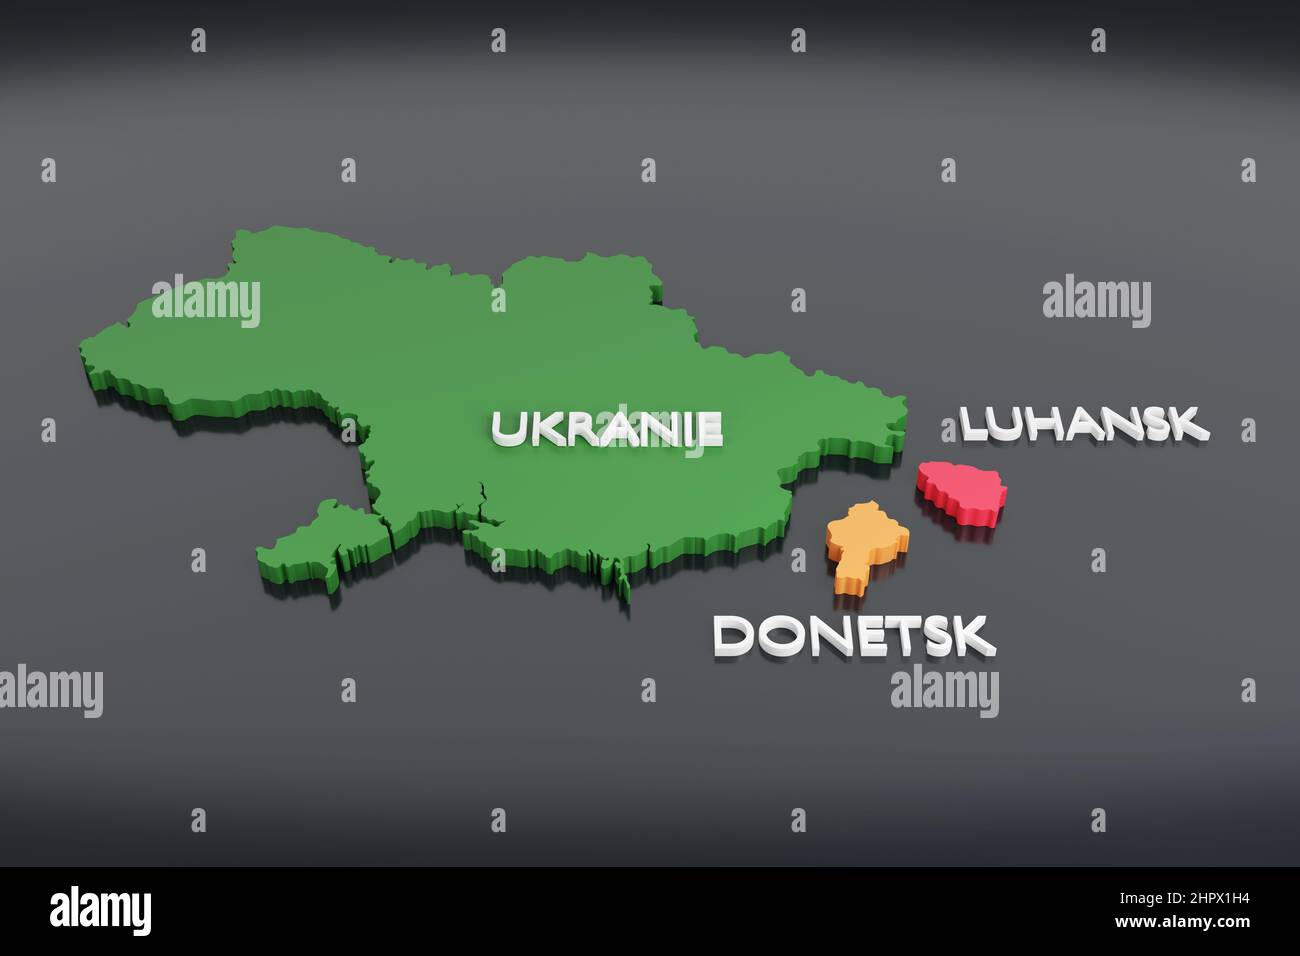 3d map of Ukraine and the two independent regions Donetsk and Luhansk. 3d illustration. Stock Photo